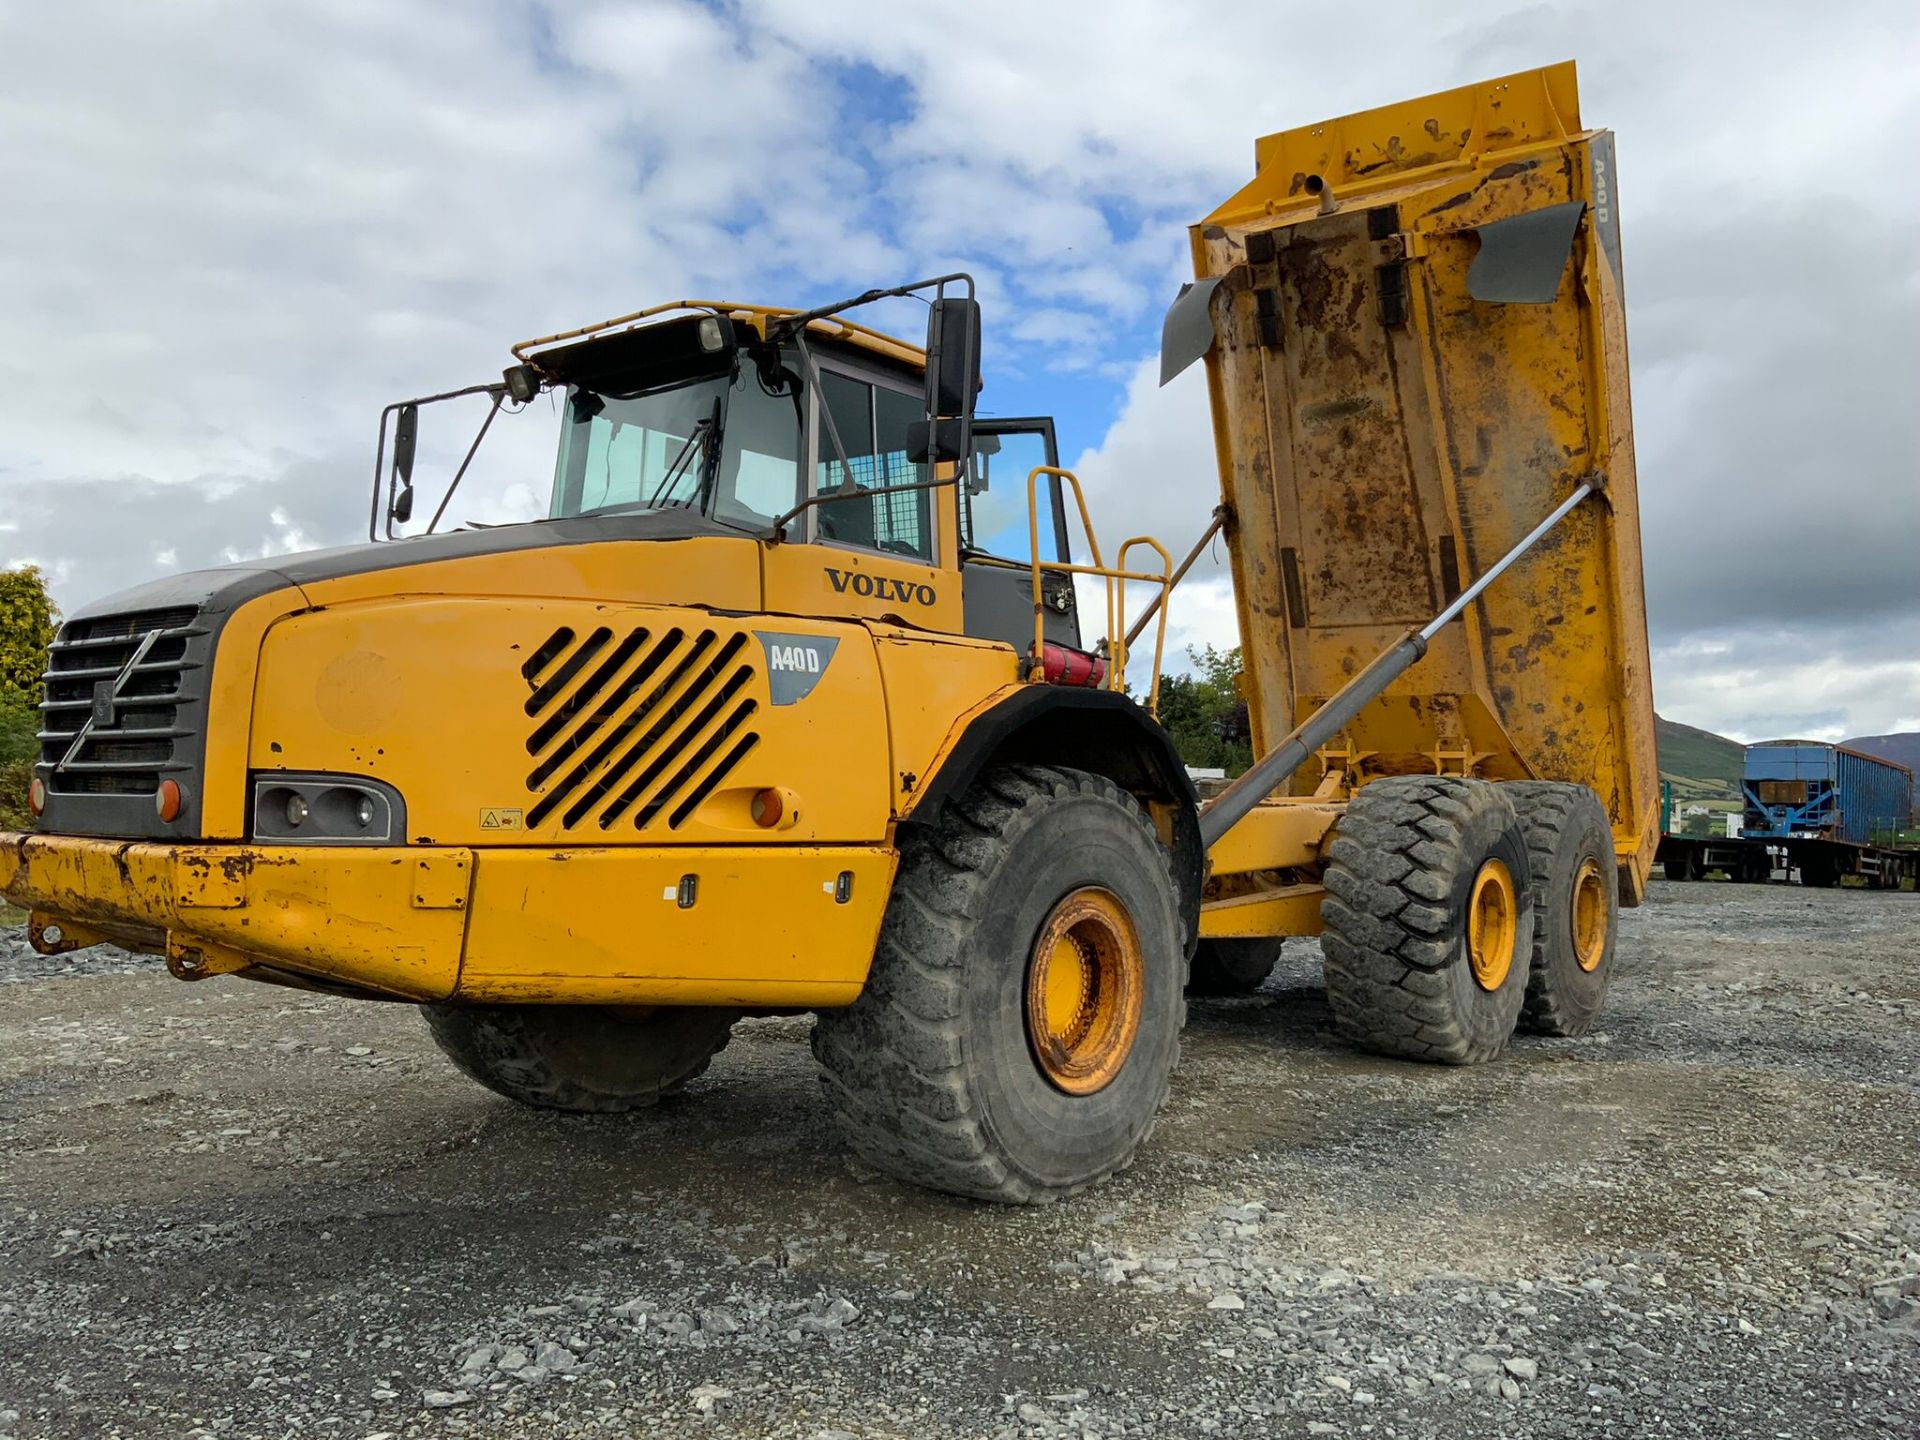 2000 VOLVO A40D ARTUCLATED DUMP TRUCK - Image 3 of 16